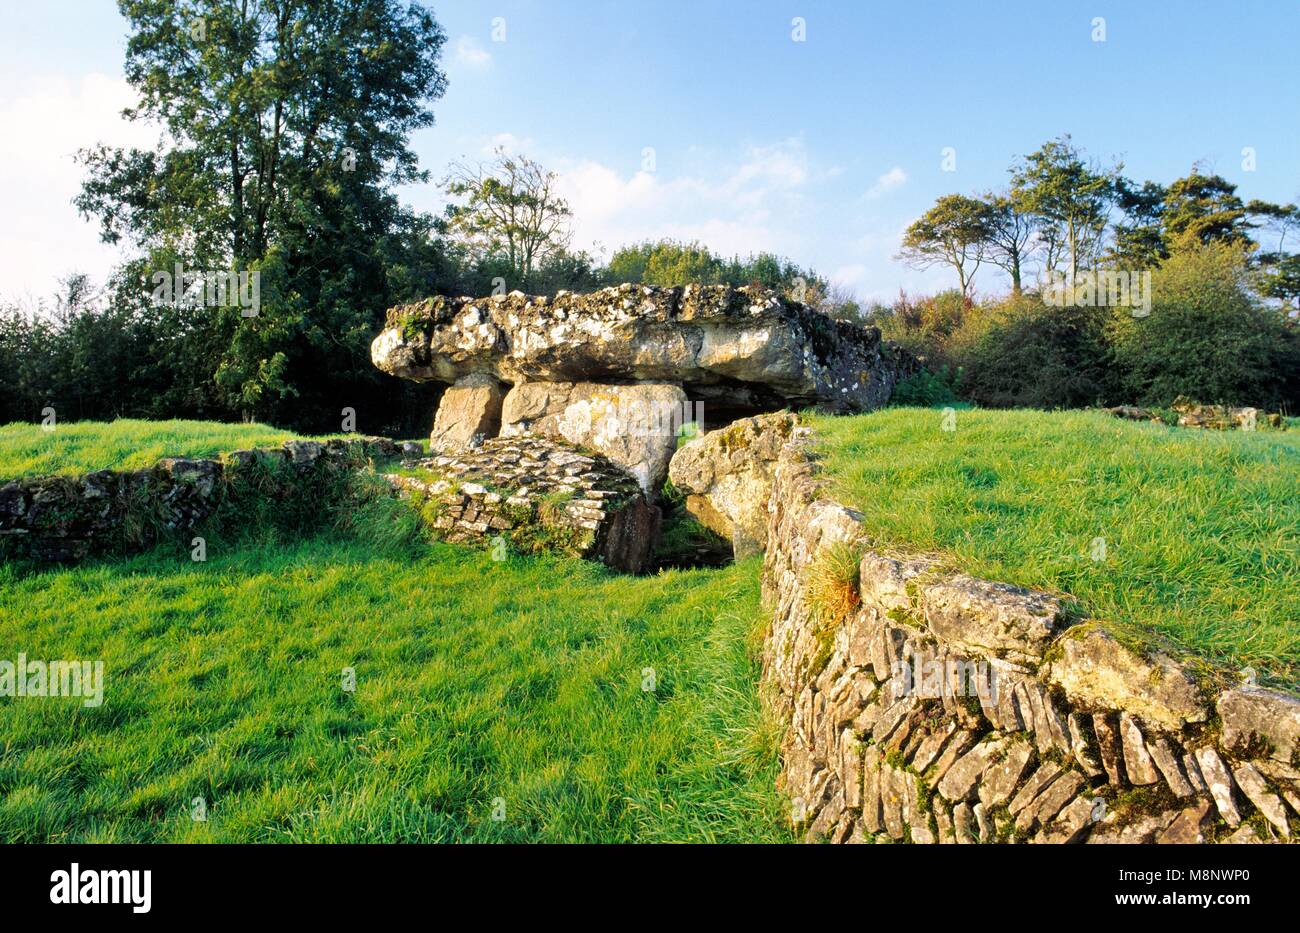 Tinkinswood prehistoric Neolithic burial chamber mound and central cist megaliths near Barry, South Glamorgan, South Wales, UK Stock Photo